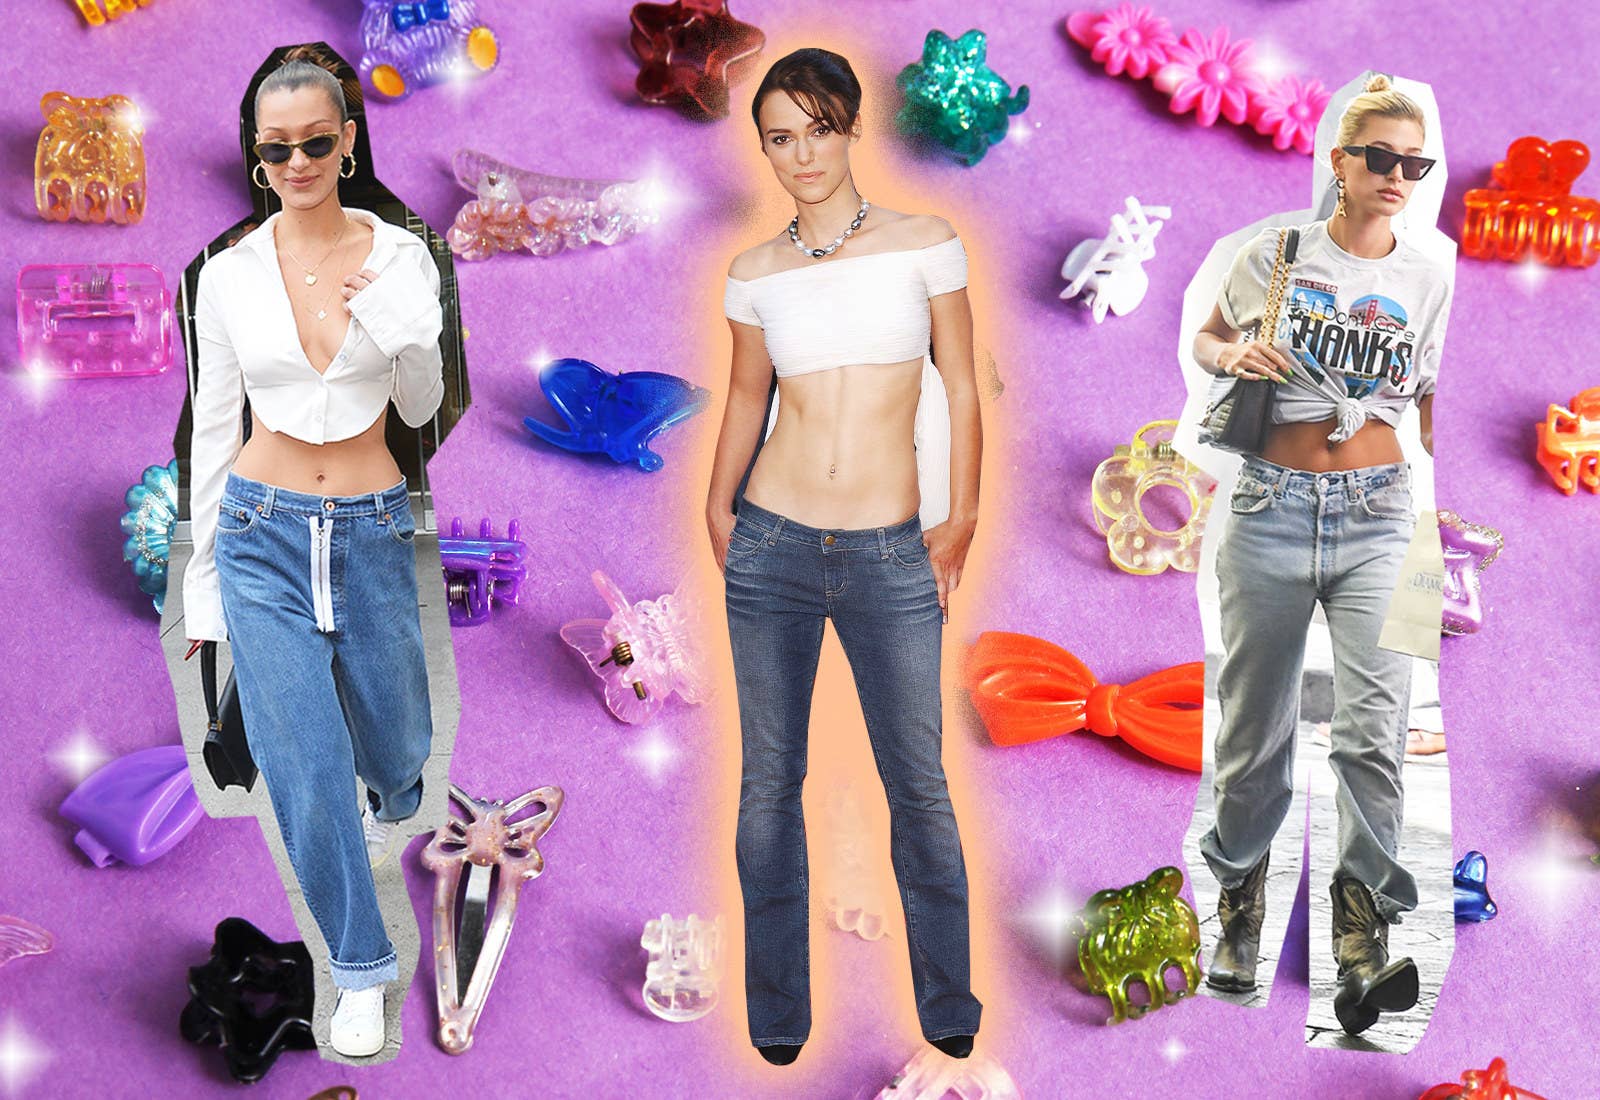 Y2K Aesthetic & The Return of 2000s Fashion! - Friday Scoop